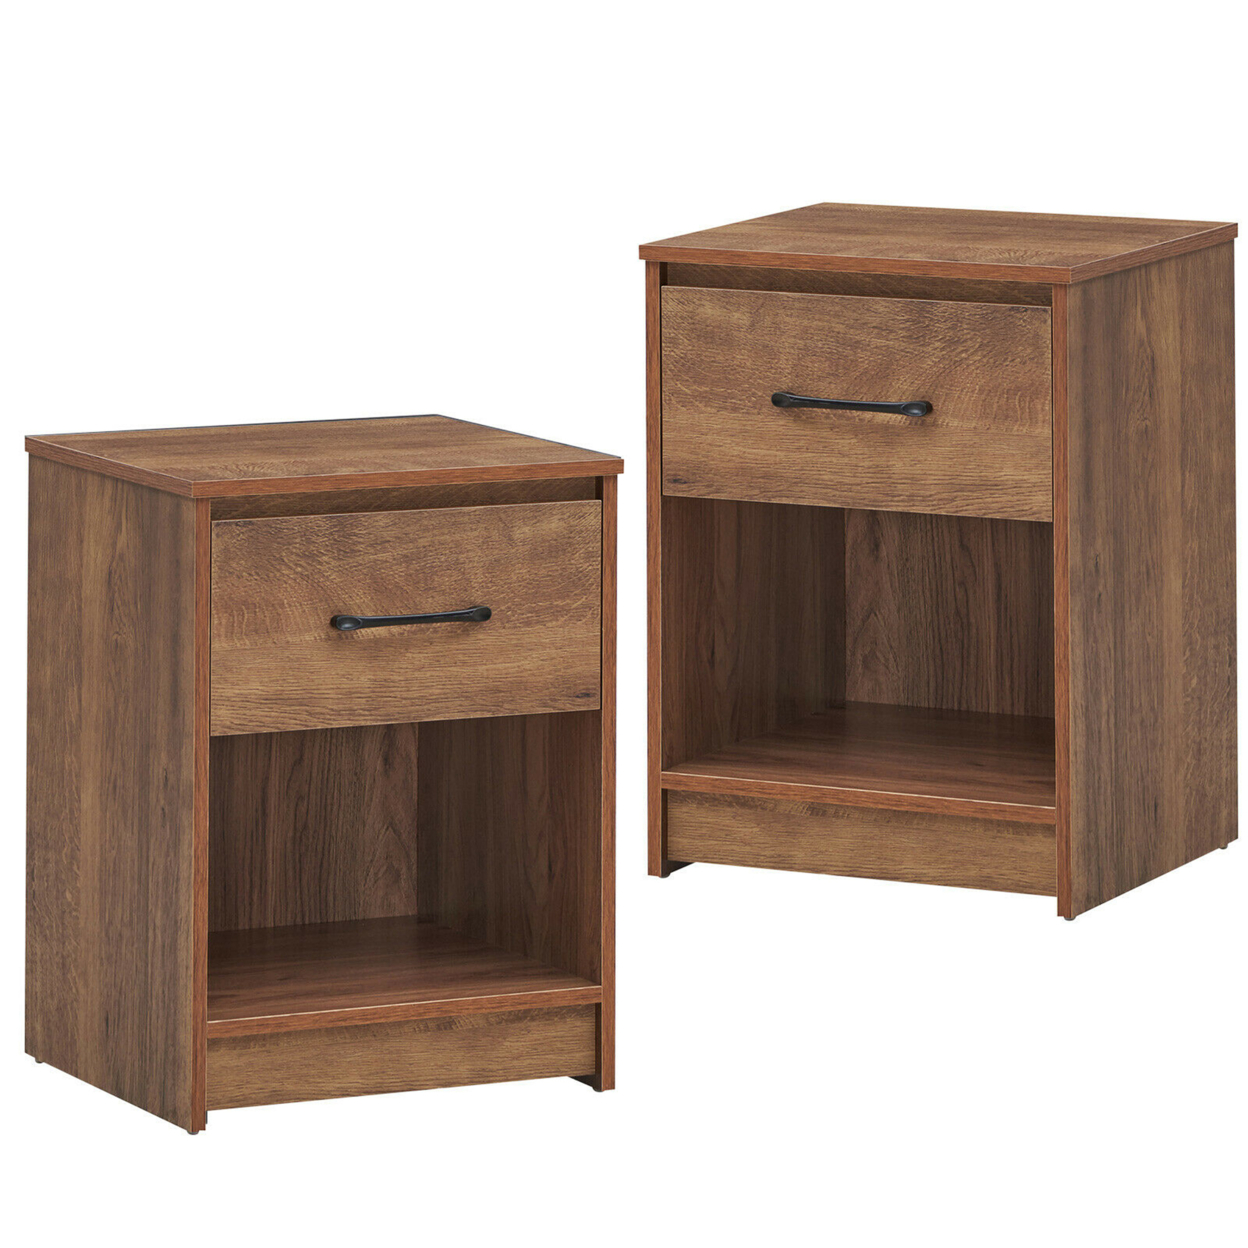 2PCS Nightstand With Drawer Storage Shelf Wooden End Side Table Bedroom Brown / Black / Natiral - Brown